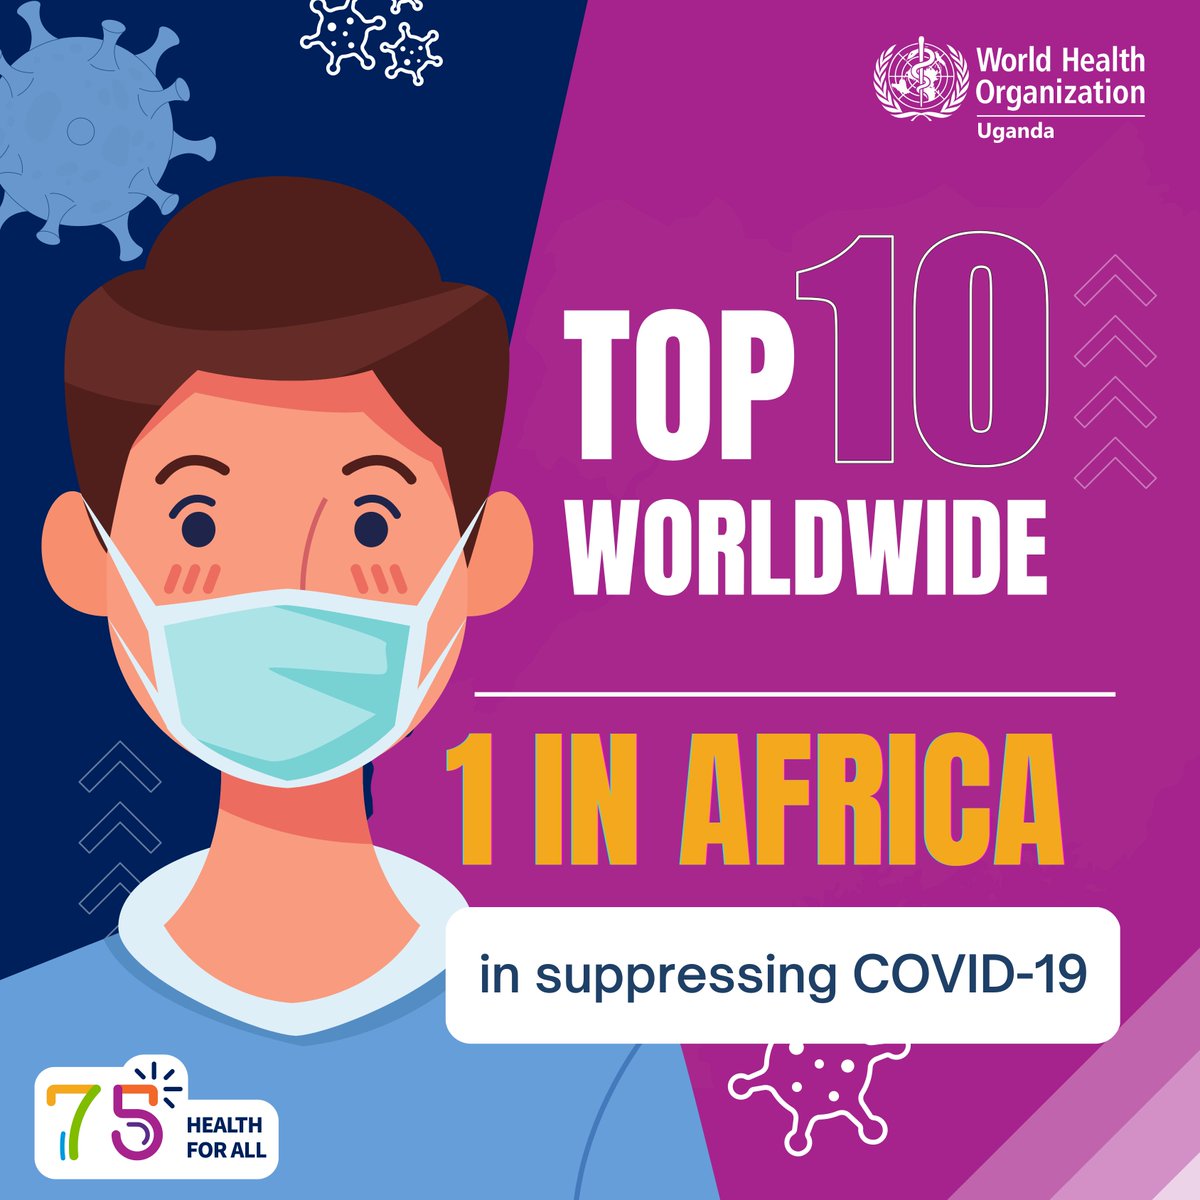 In August 2020, Uganda was named by The Lancet medical journal among the top 10 best-performing countries worldwide in suppressing COVID-19 and No. 1 in Africa. @MinofHelathUg continues to encourage vaccination & COVID-19 SOPs. #WHO75 #UgHealthMilestones #HealthForAll